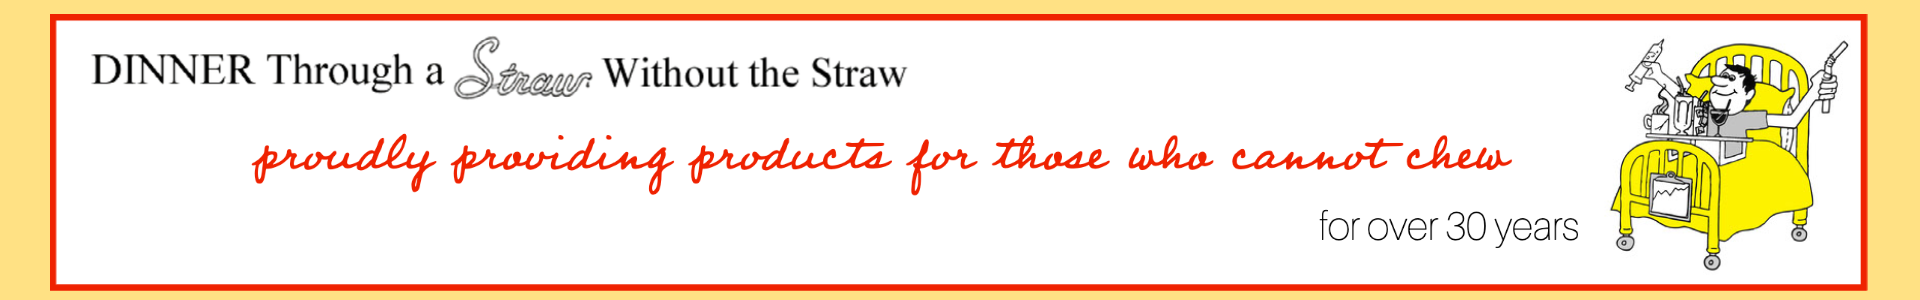 Dinner Through a Straw - providing products for those who cannot chew 615-473-6577